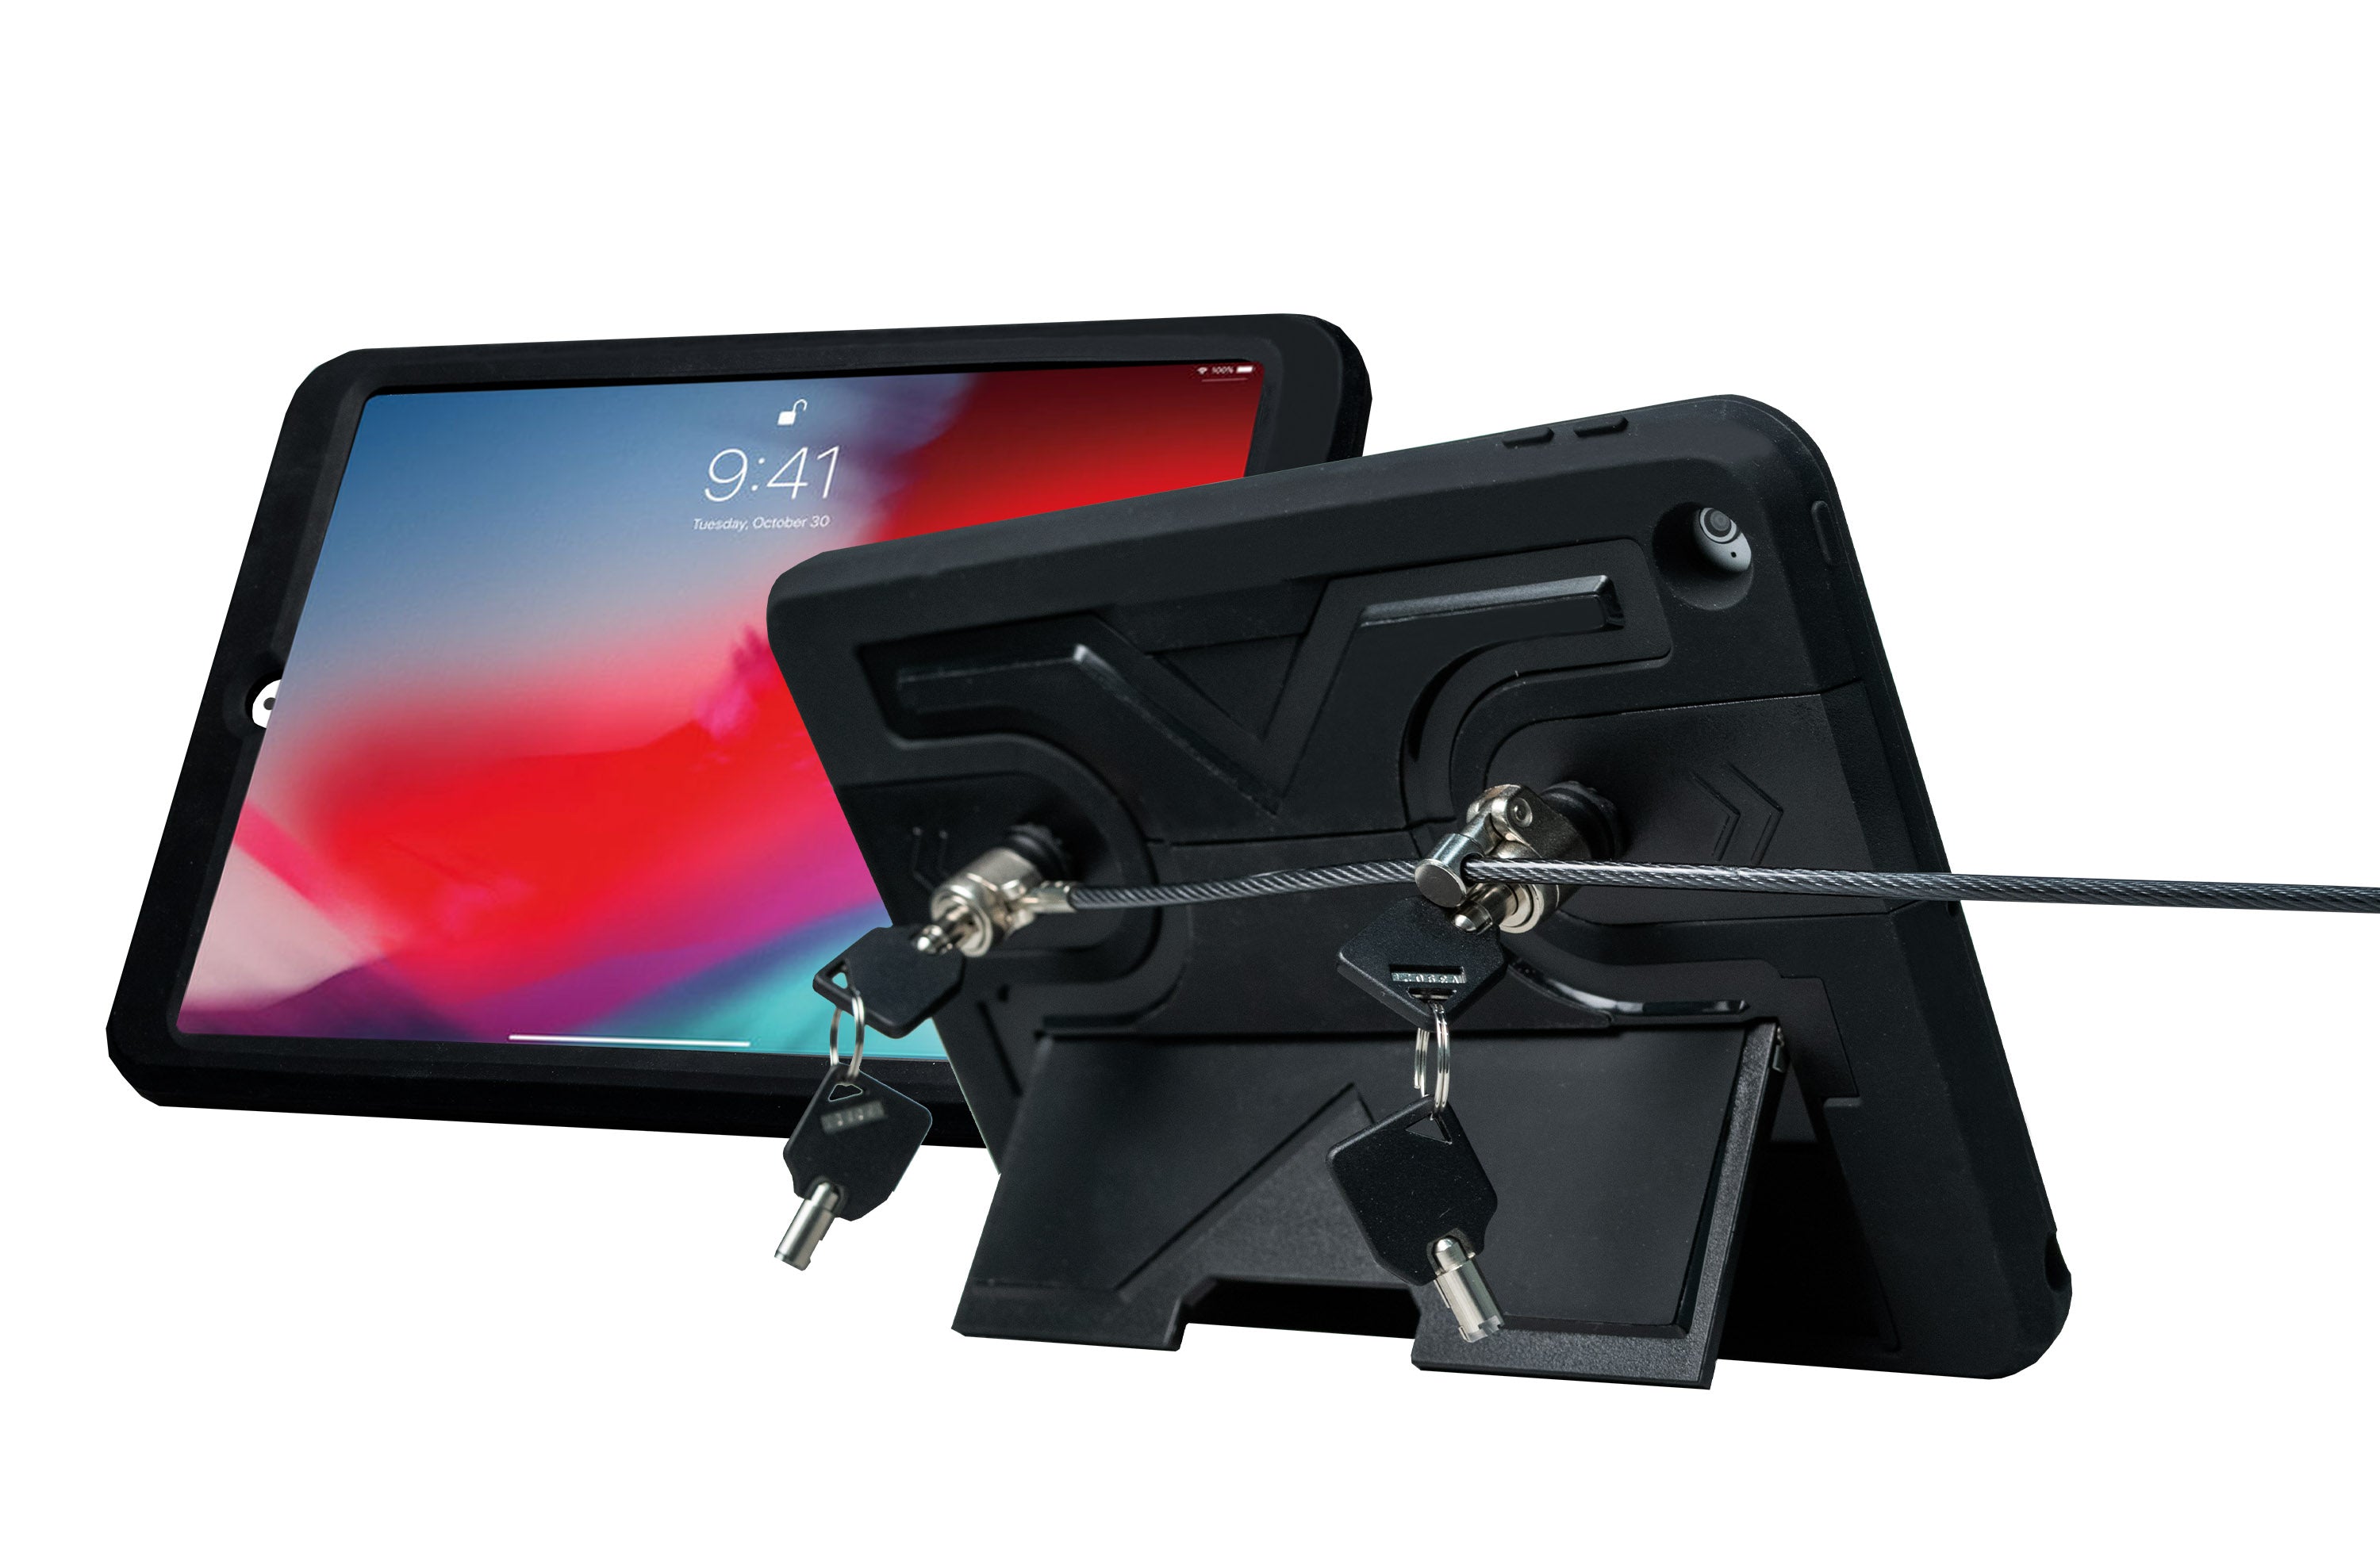 Rugged Security Case with Kickstand and Anti-Theft Cable for iPad Pro 9.7, iPad (Gen. 5-6), and iPad Air (Gen. 1-2)